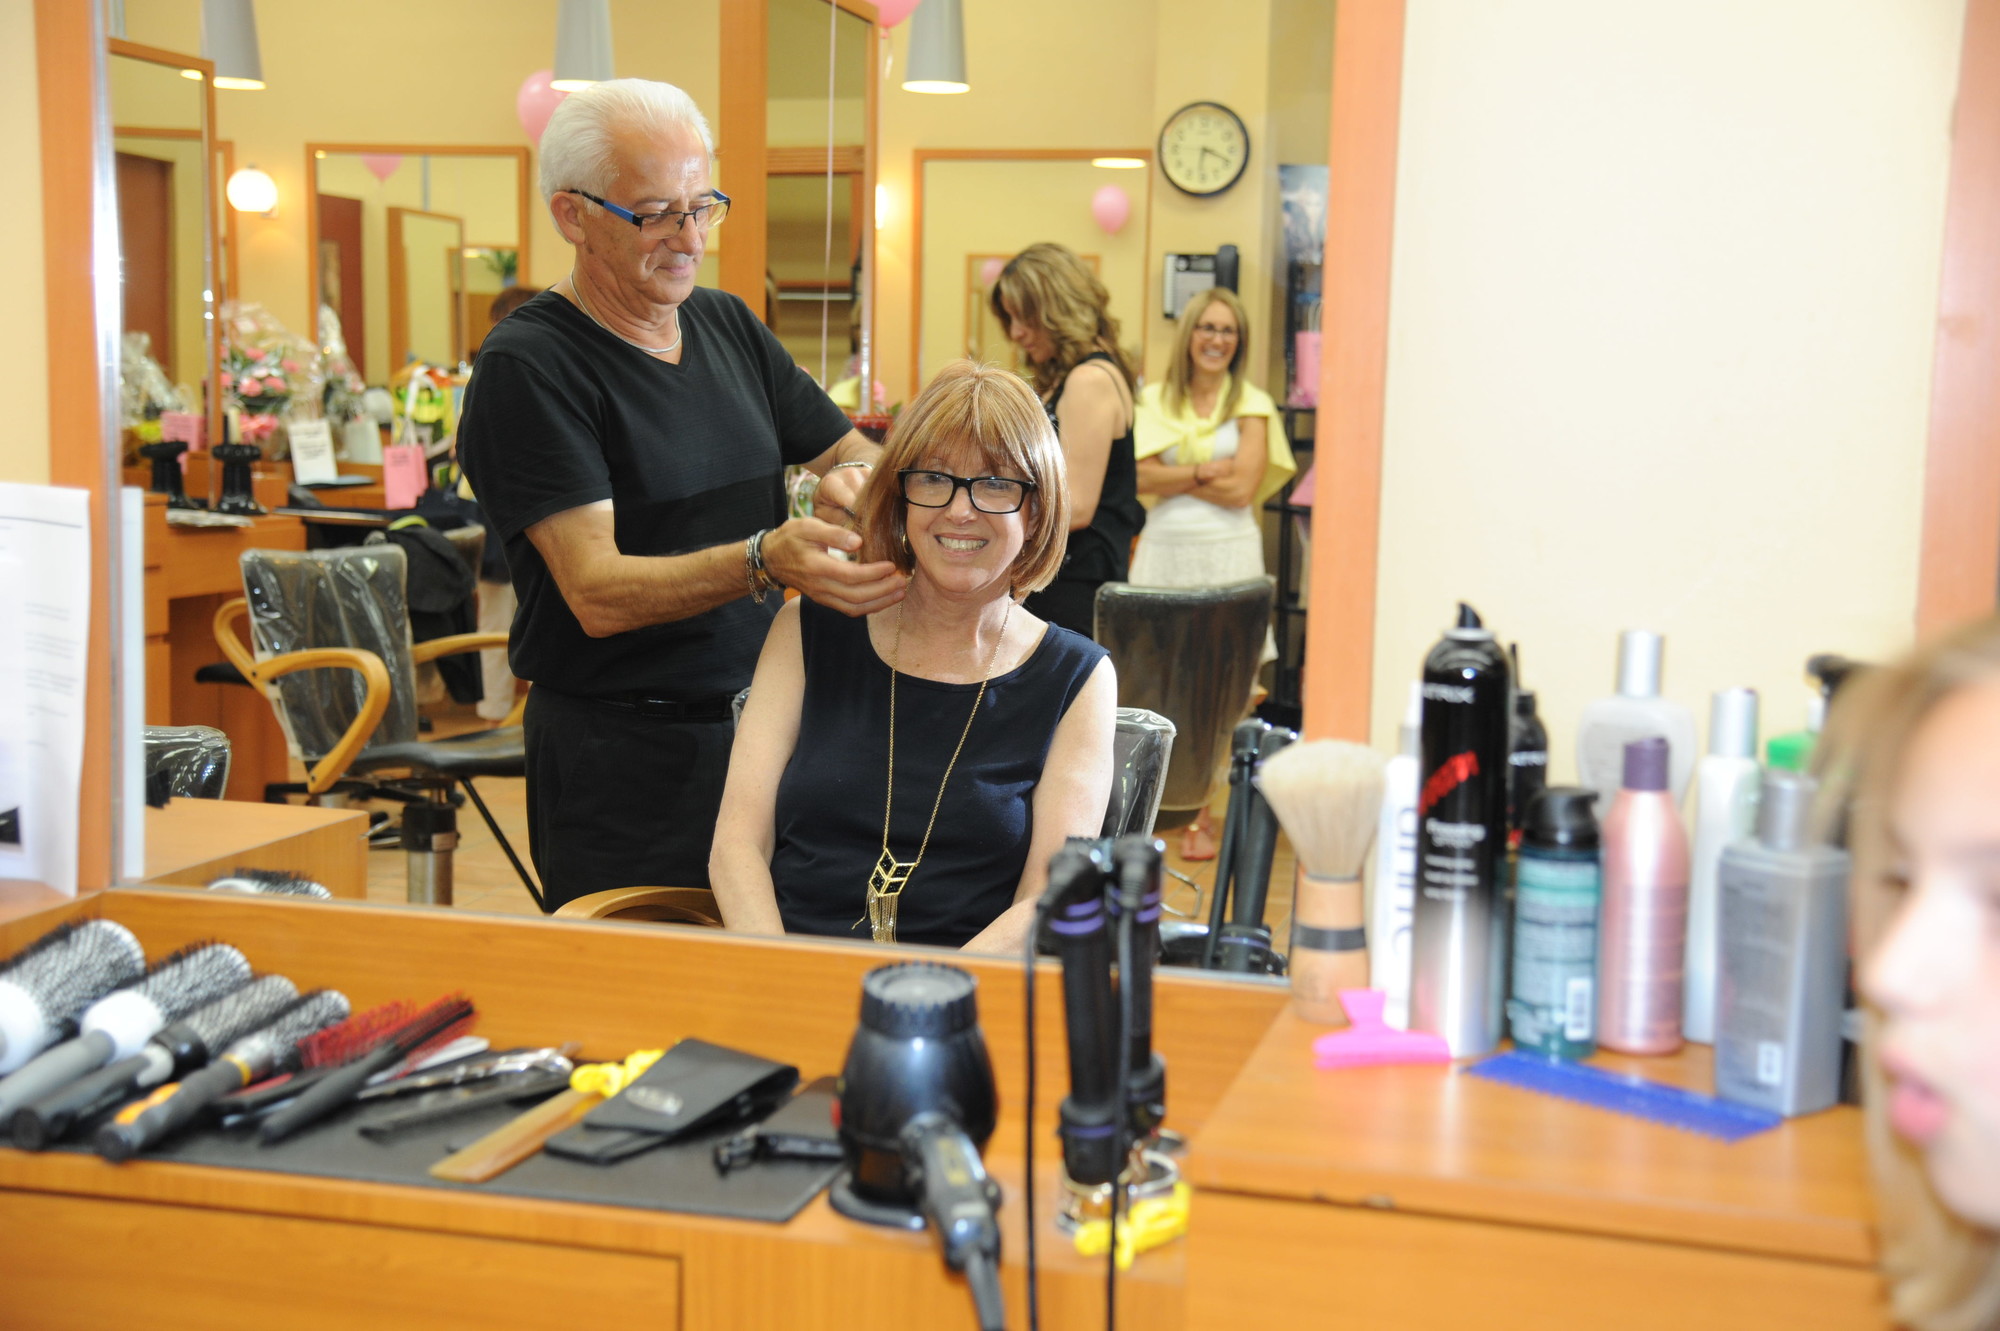 Nancy Schawelson Friedman has her hair styled by Hair Expo owner Mario Gentile.